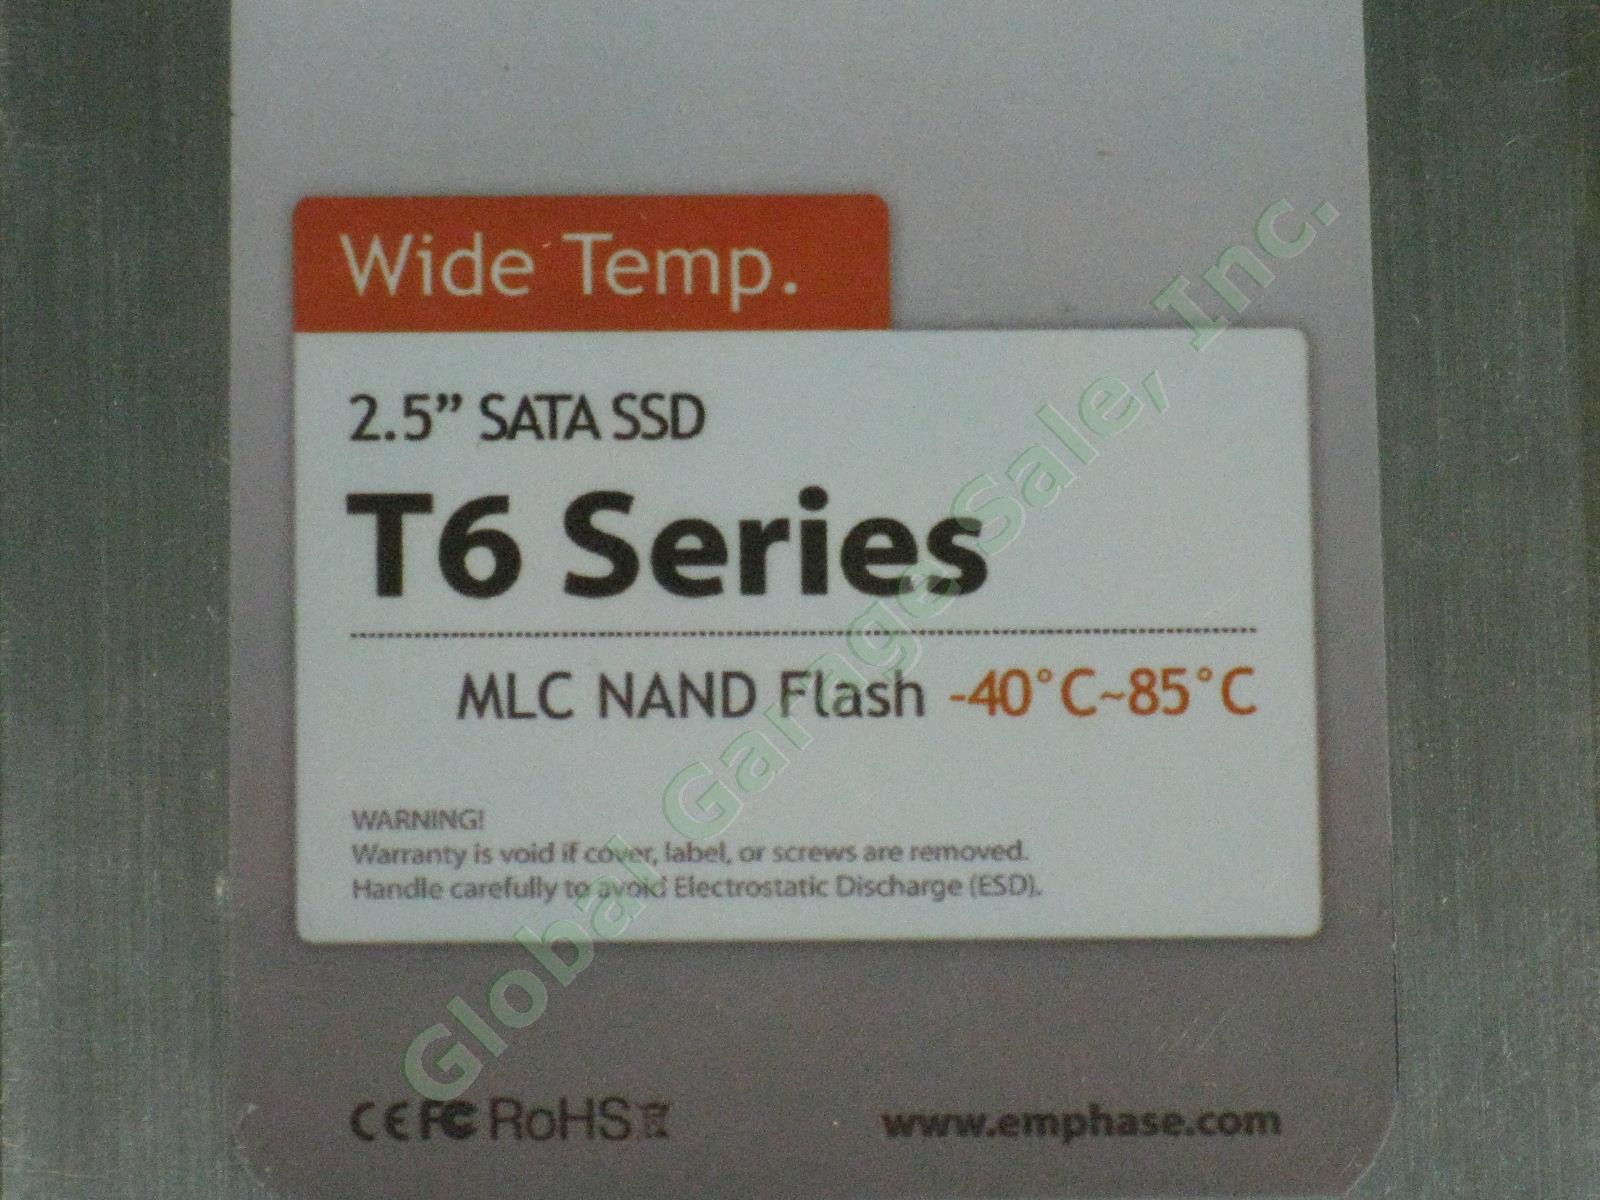 10 NEW Emphase T6 2.5" MLC NAND 60GB SSD Industrial Temperature Hard Drive Lot 2